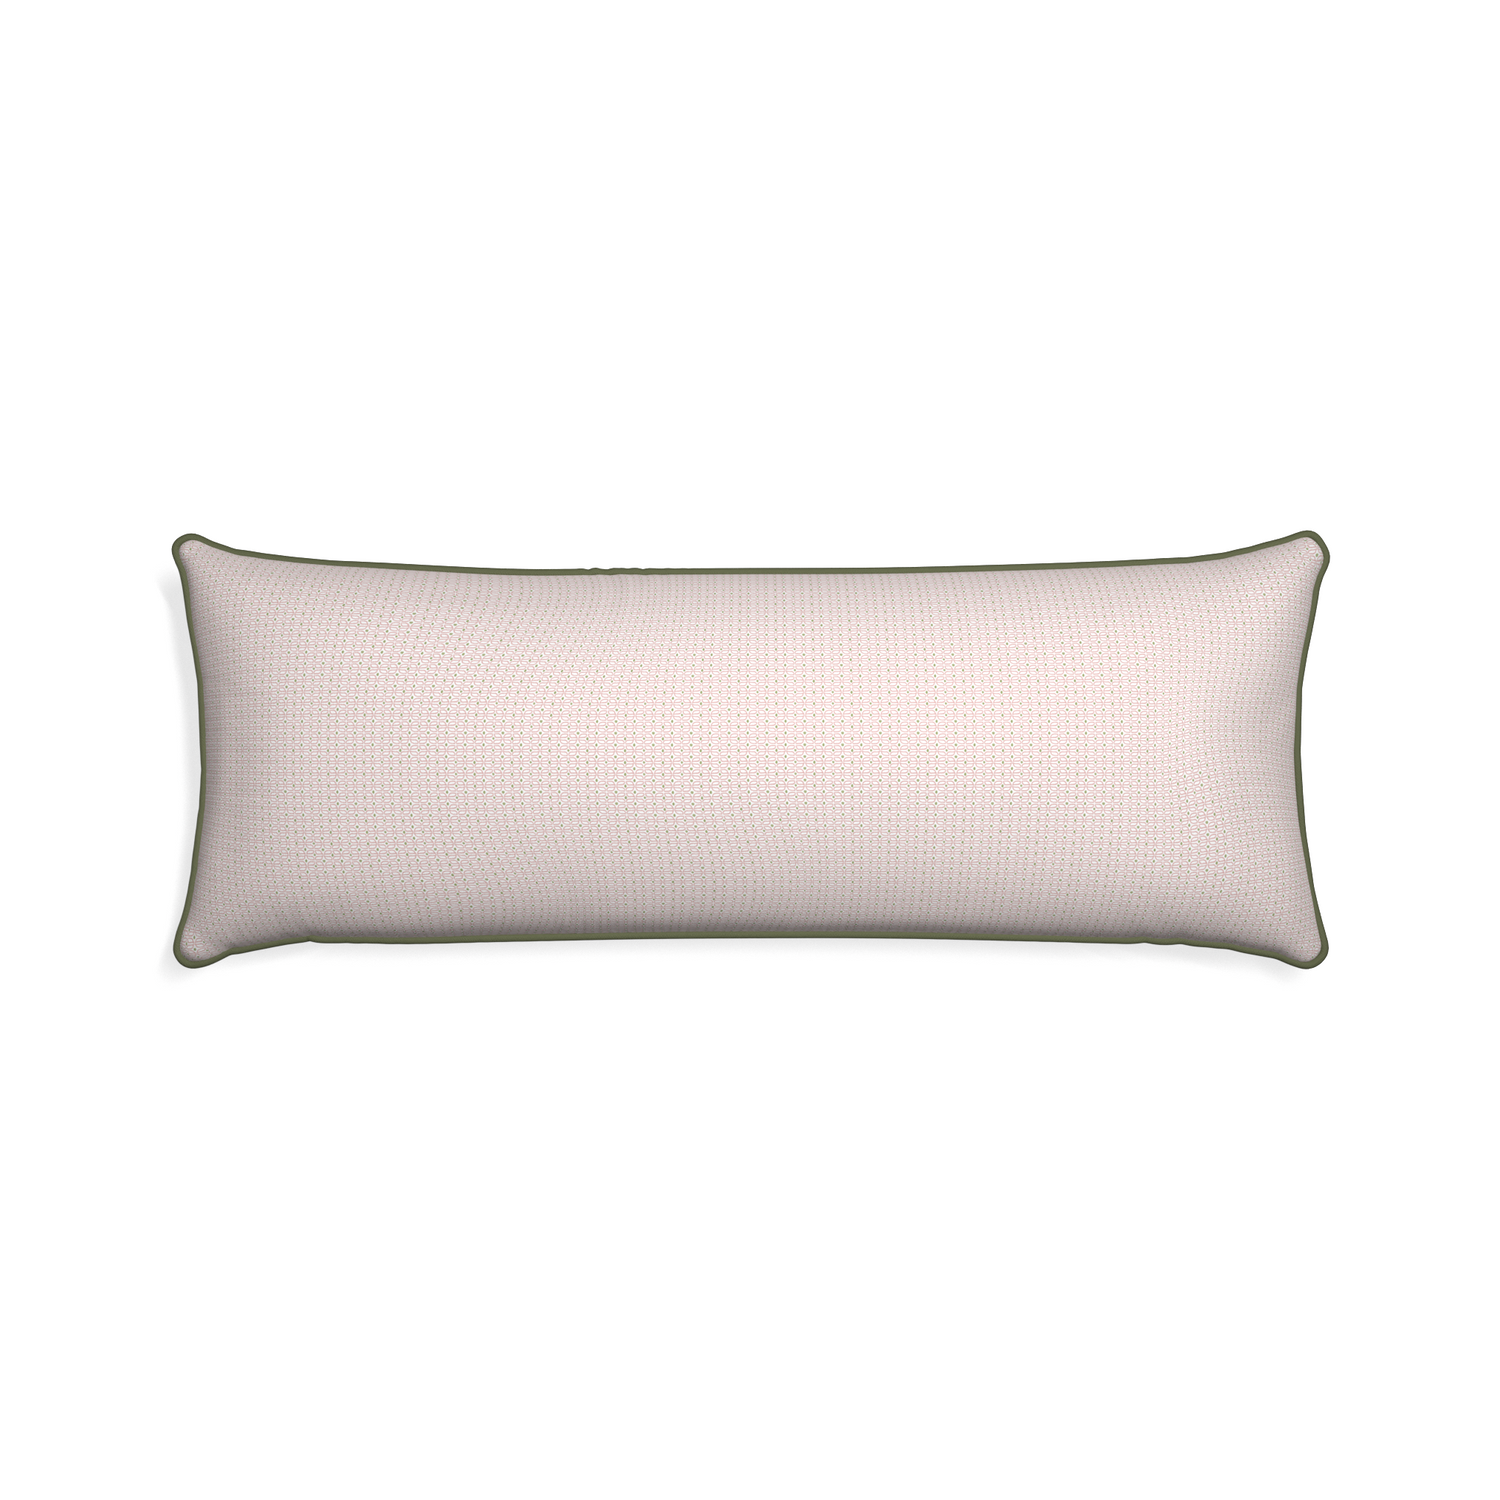 Xl-lumbar loomi pink custom pillow with f piping on white background